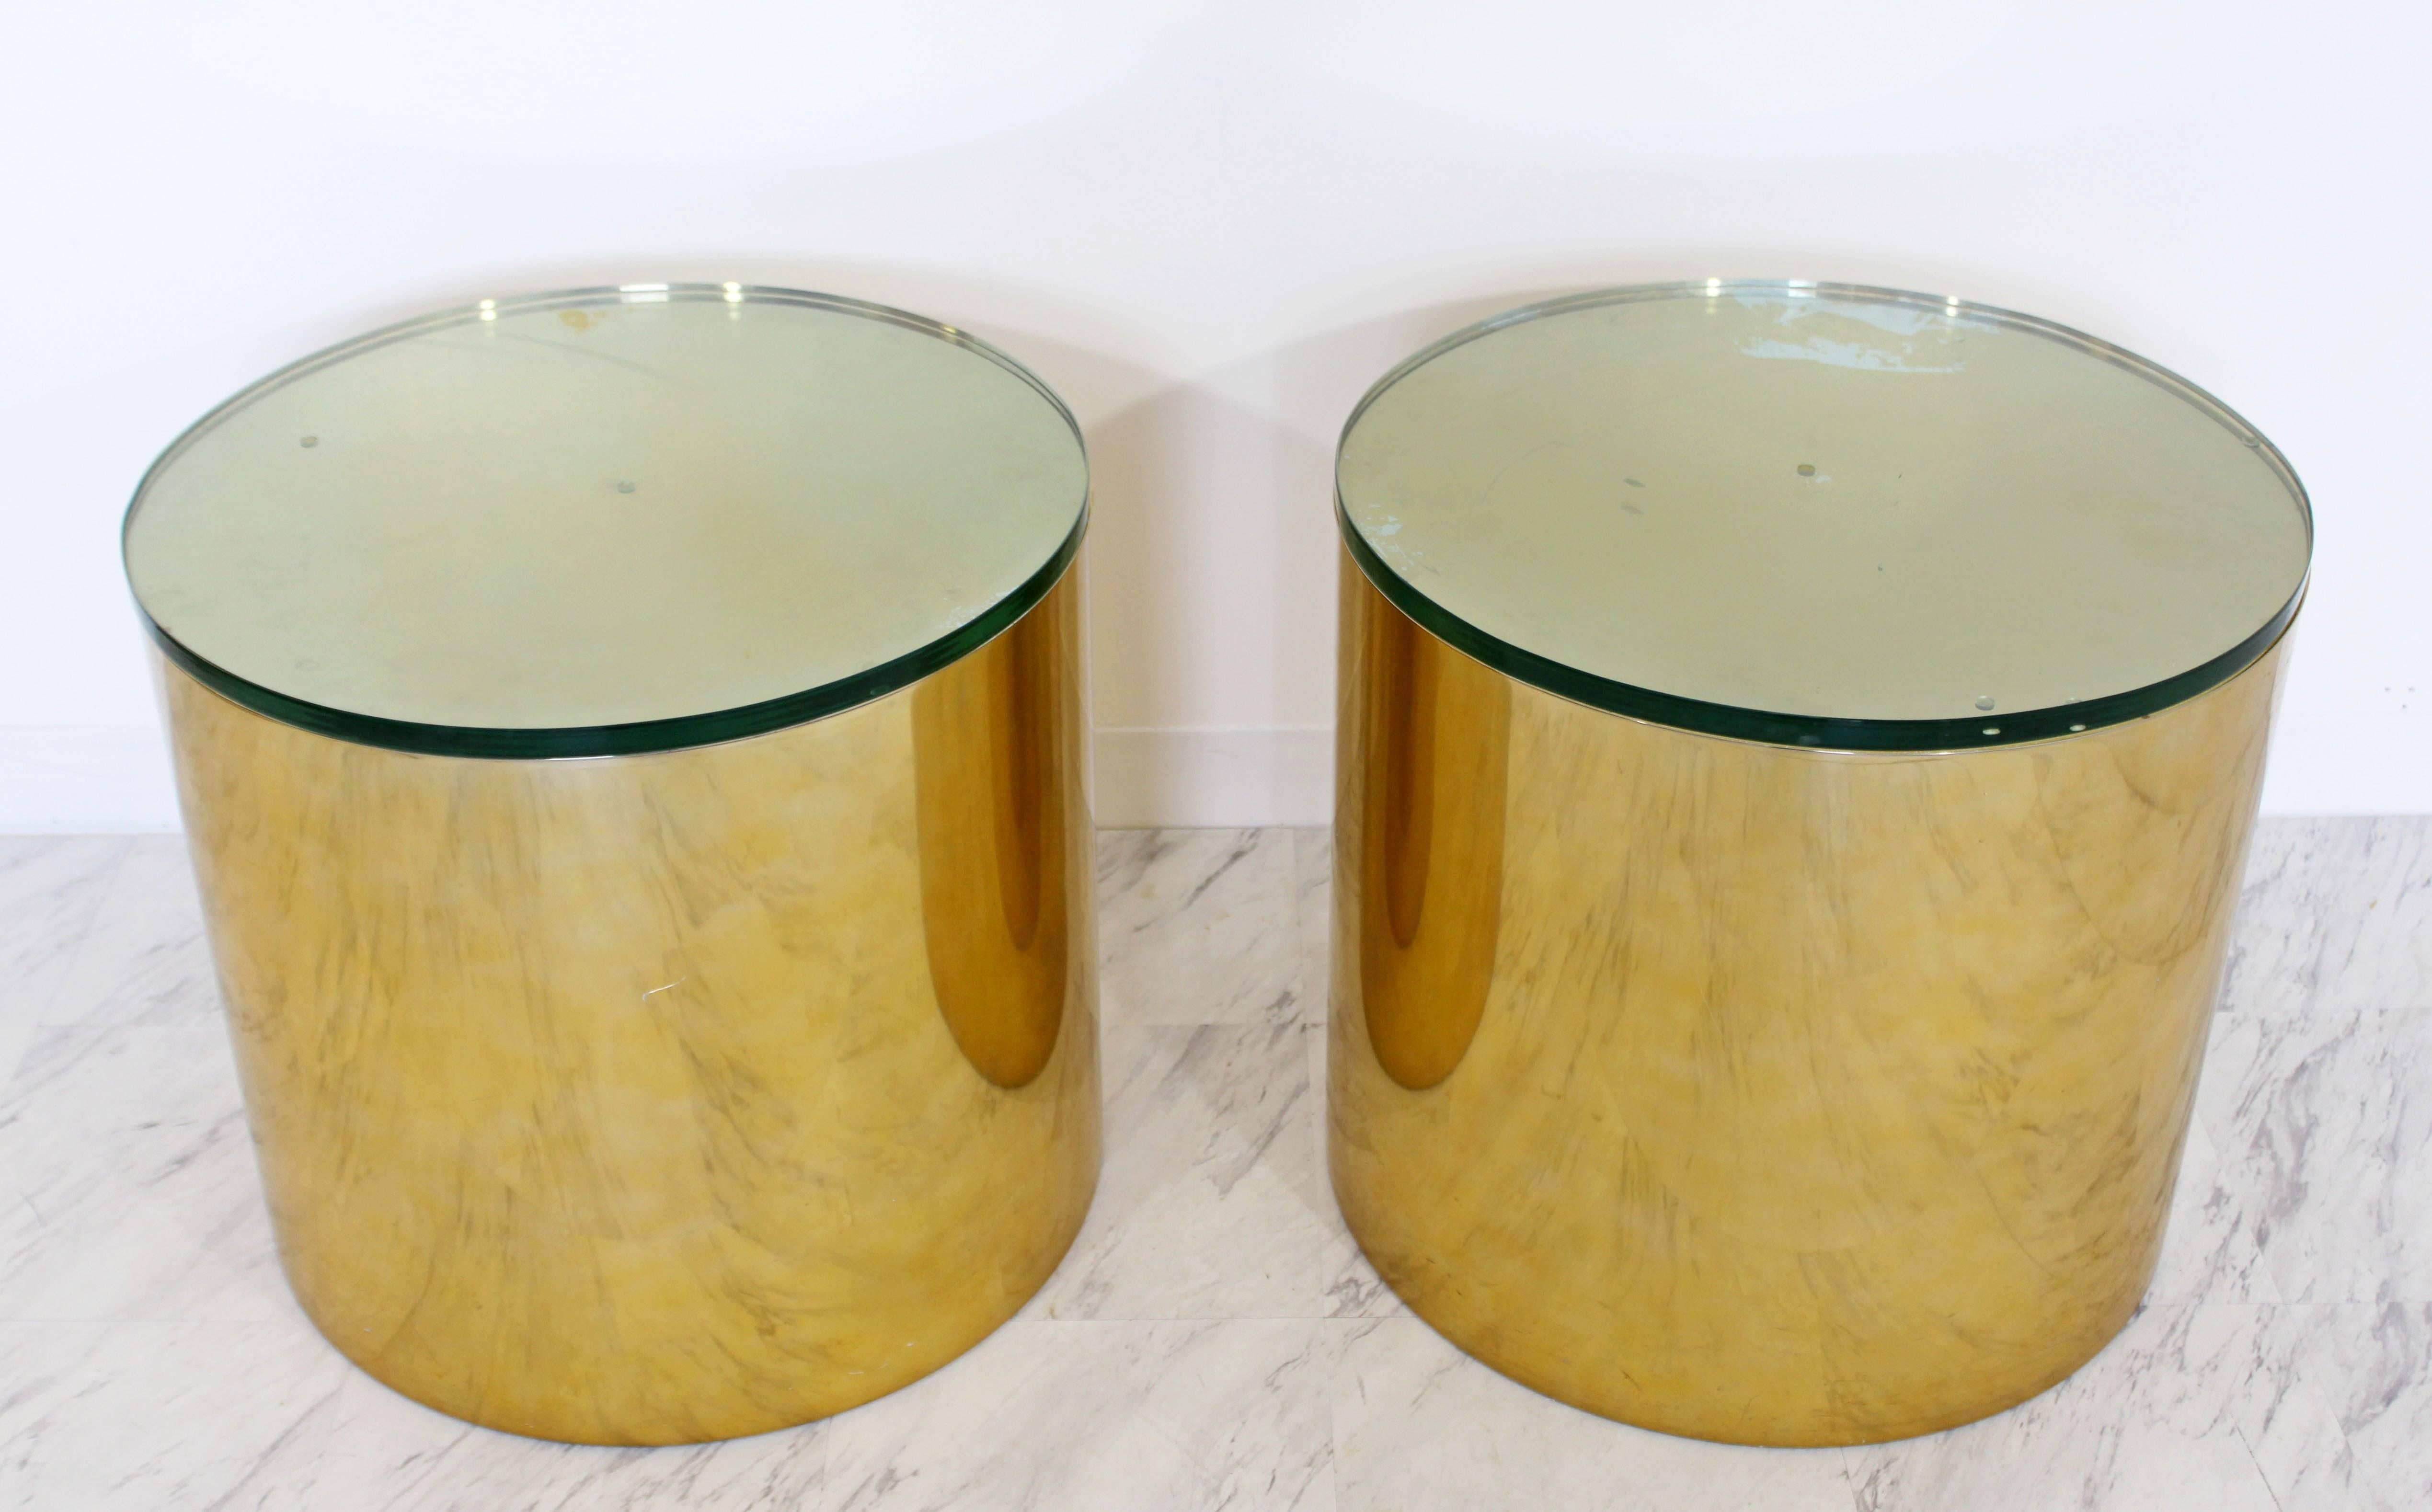 For your consideration is an utterly fabulous, pair of brass polished aluminium, round drum side or end tables, with green glass tops, that were designed by Paul Mayen for Habitat International, circa 1970s. In great vintage condition, with some